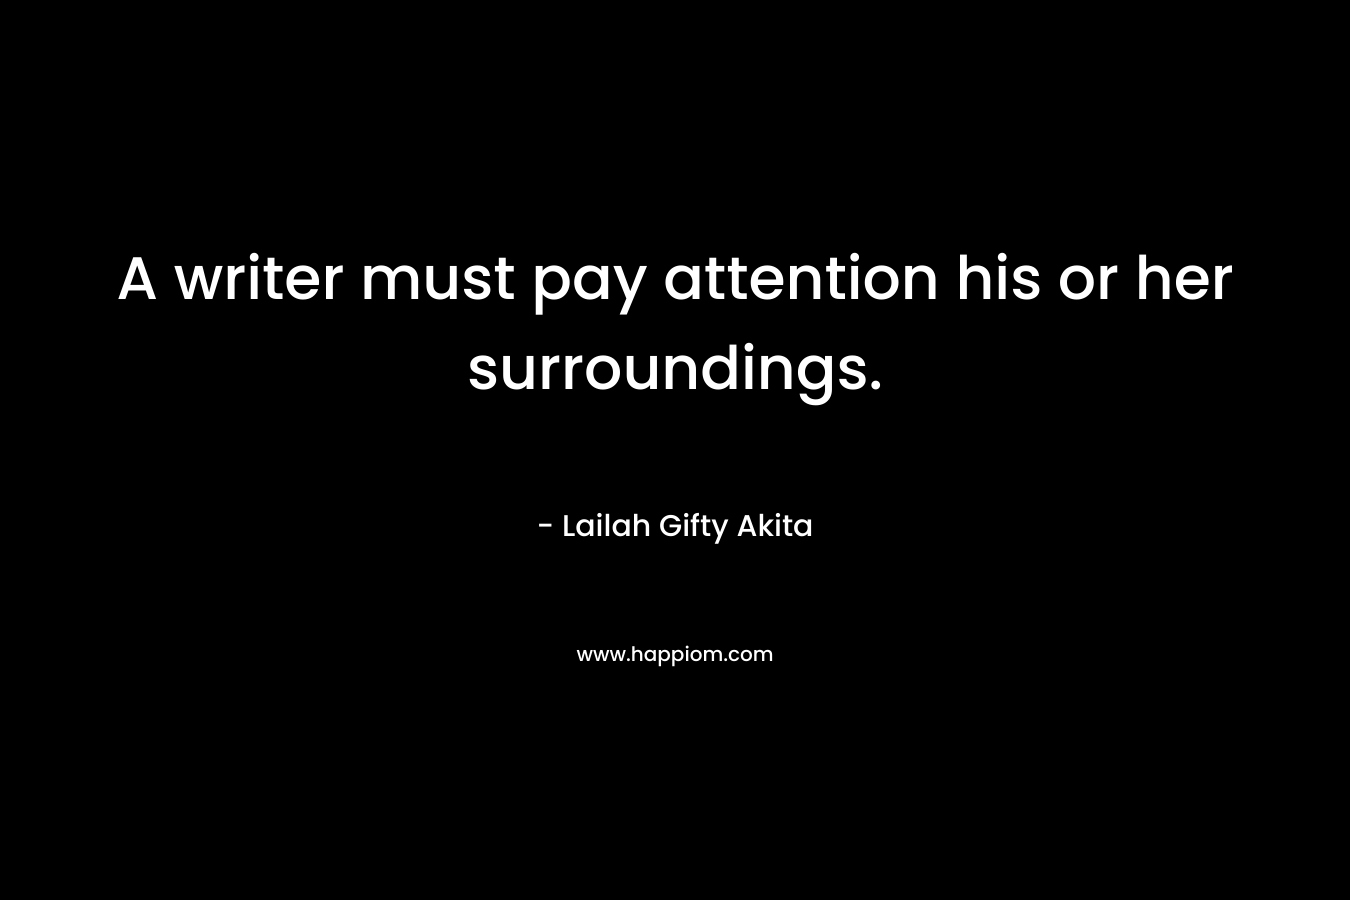 A writer must pay attention his or her surroundings.